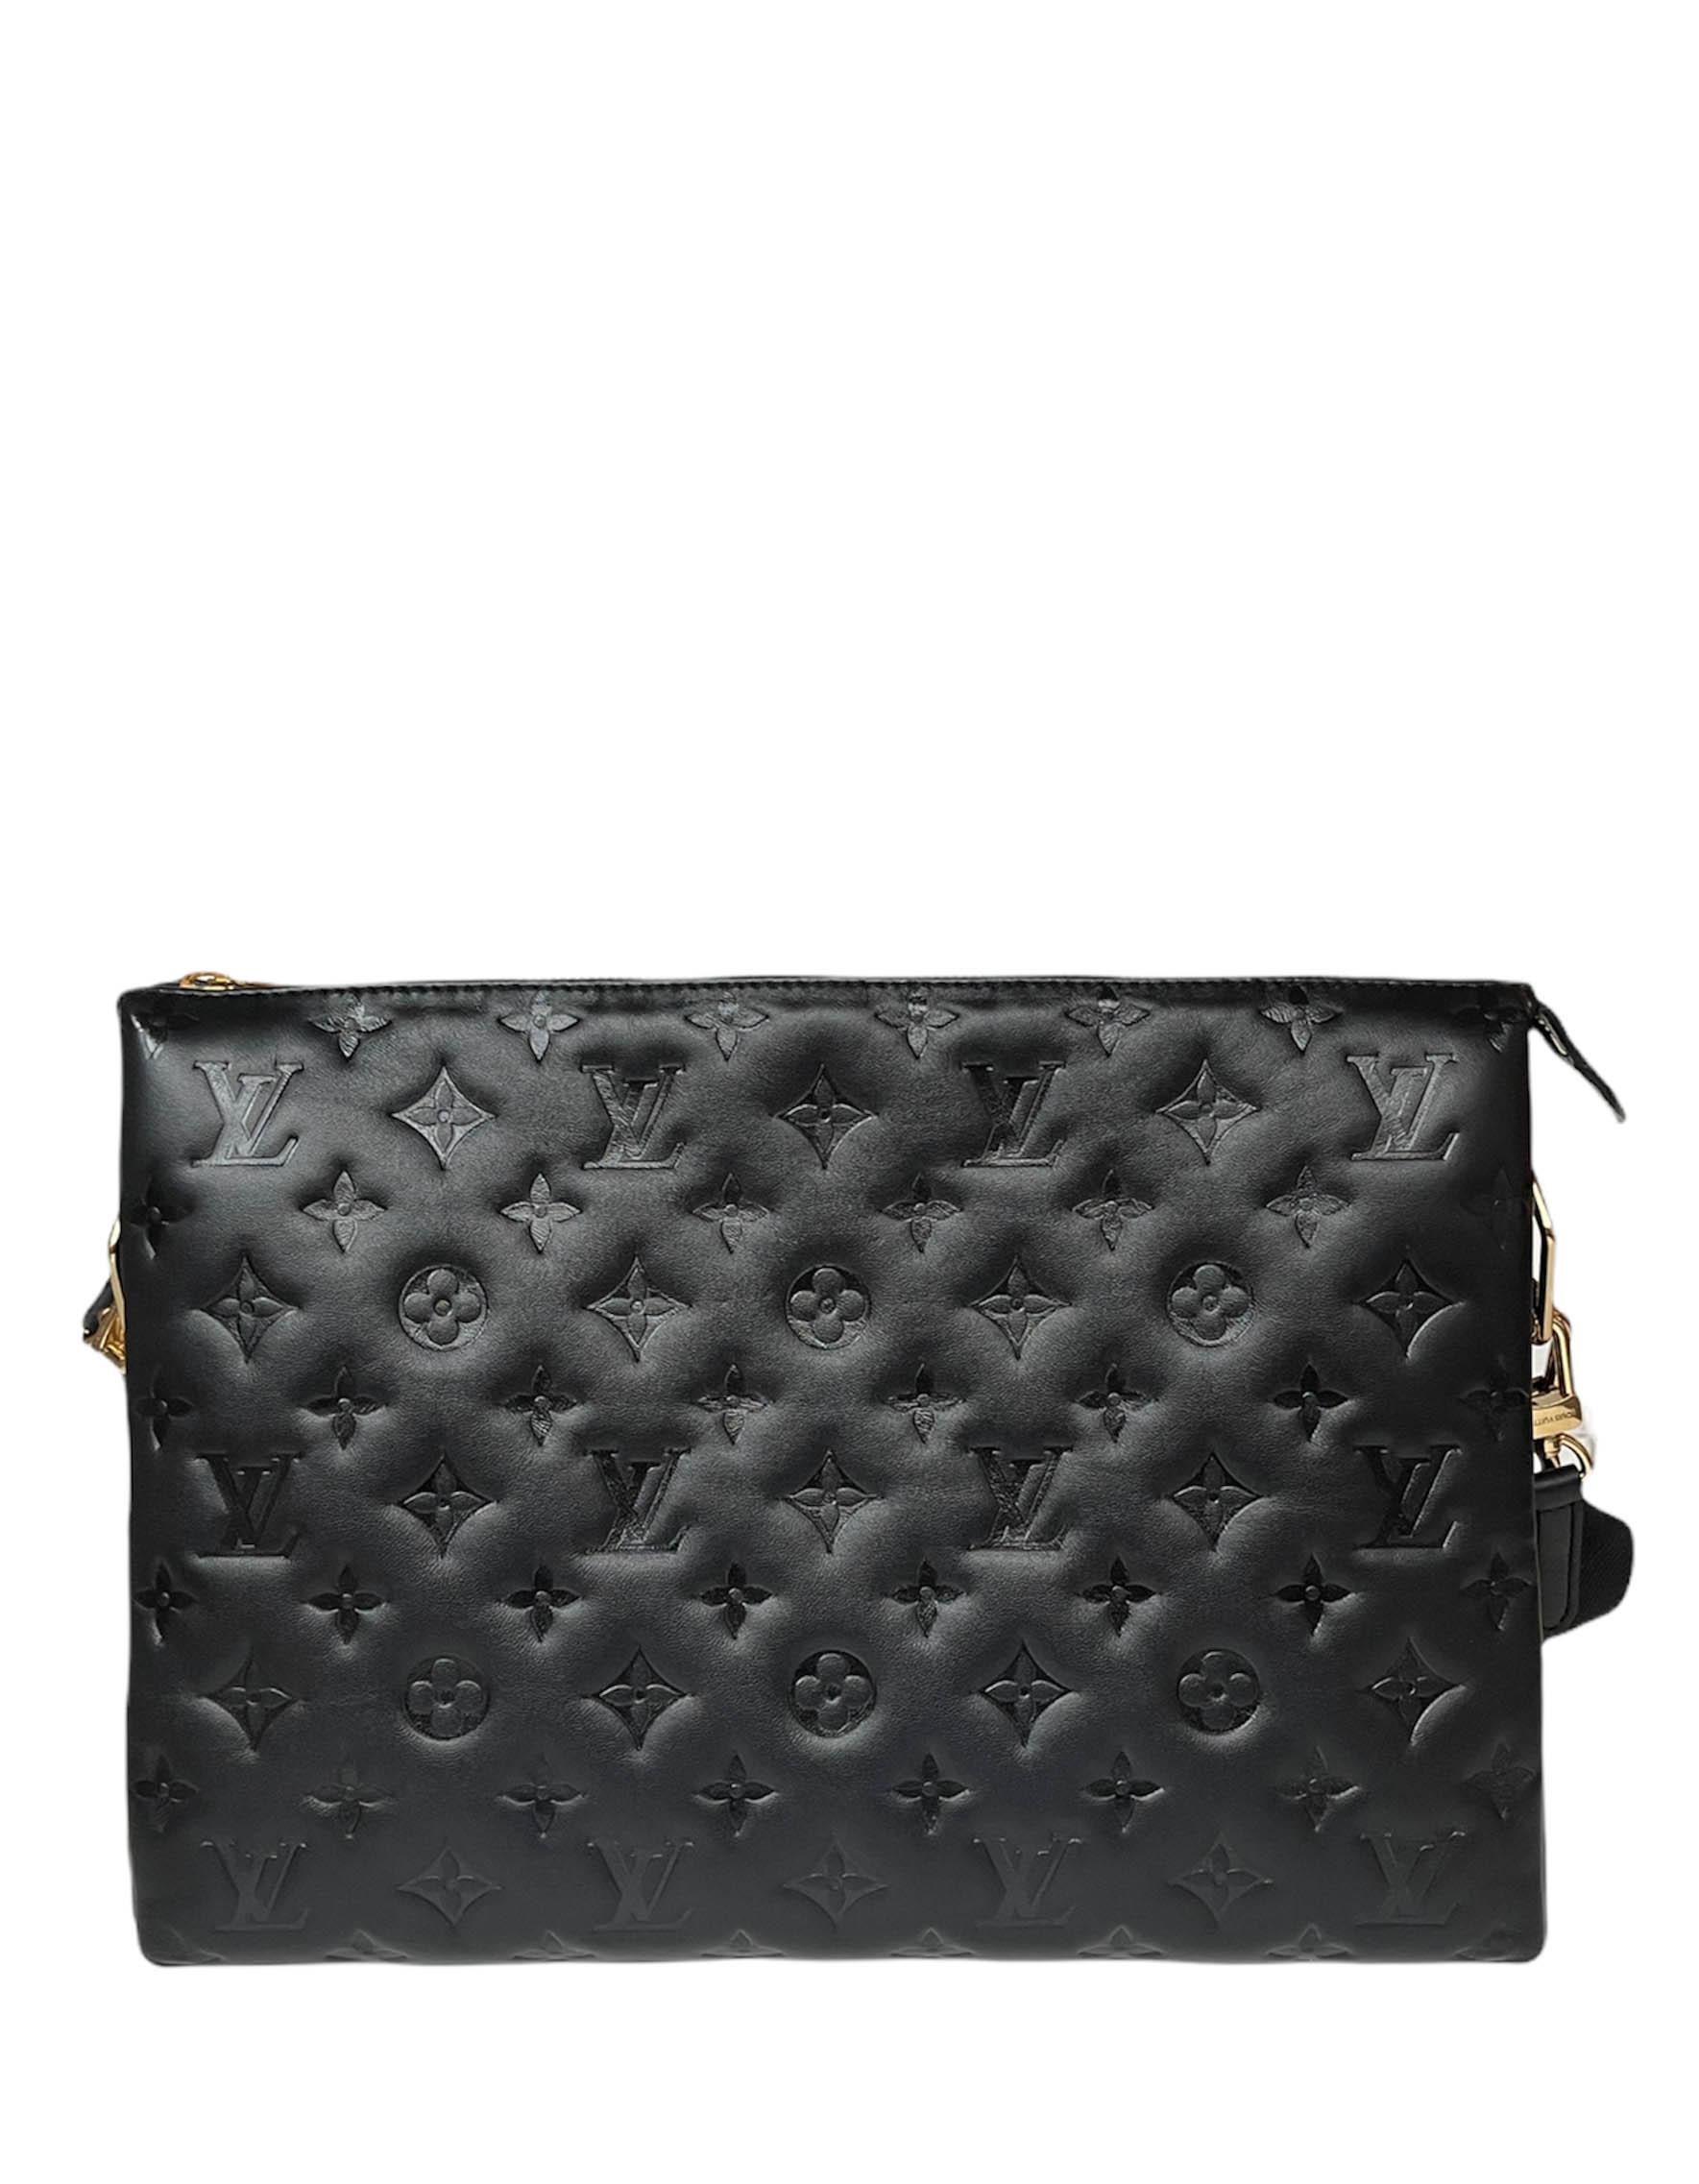 Louis Vuitton Black Embossed Monogram Lambskin Leather Coussin MM Bag.  Features adjustable canvas strap allowing for crossbody or shoulder carry, and chain strap for baguette and under-arm carry.
Made In: France
Year of Production: 2021
Color: